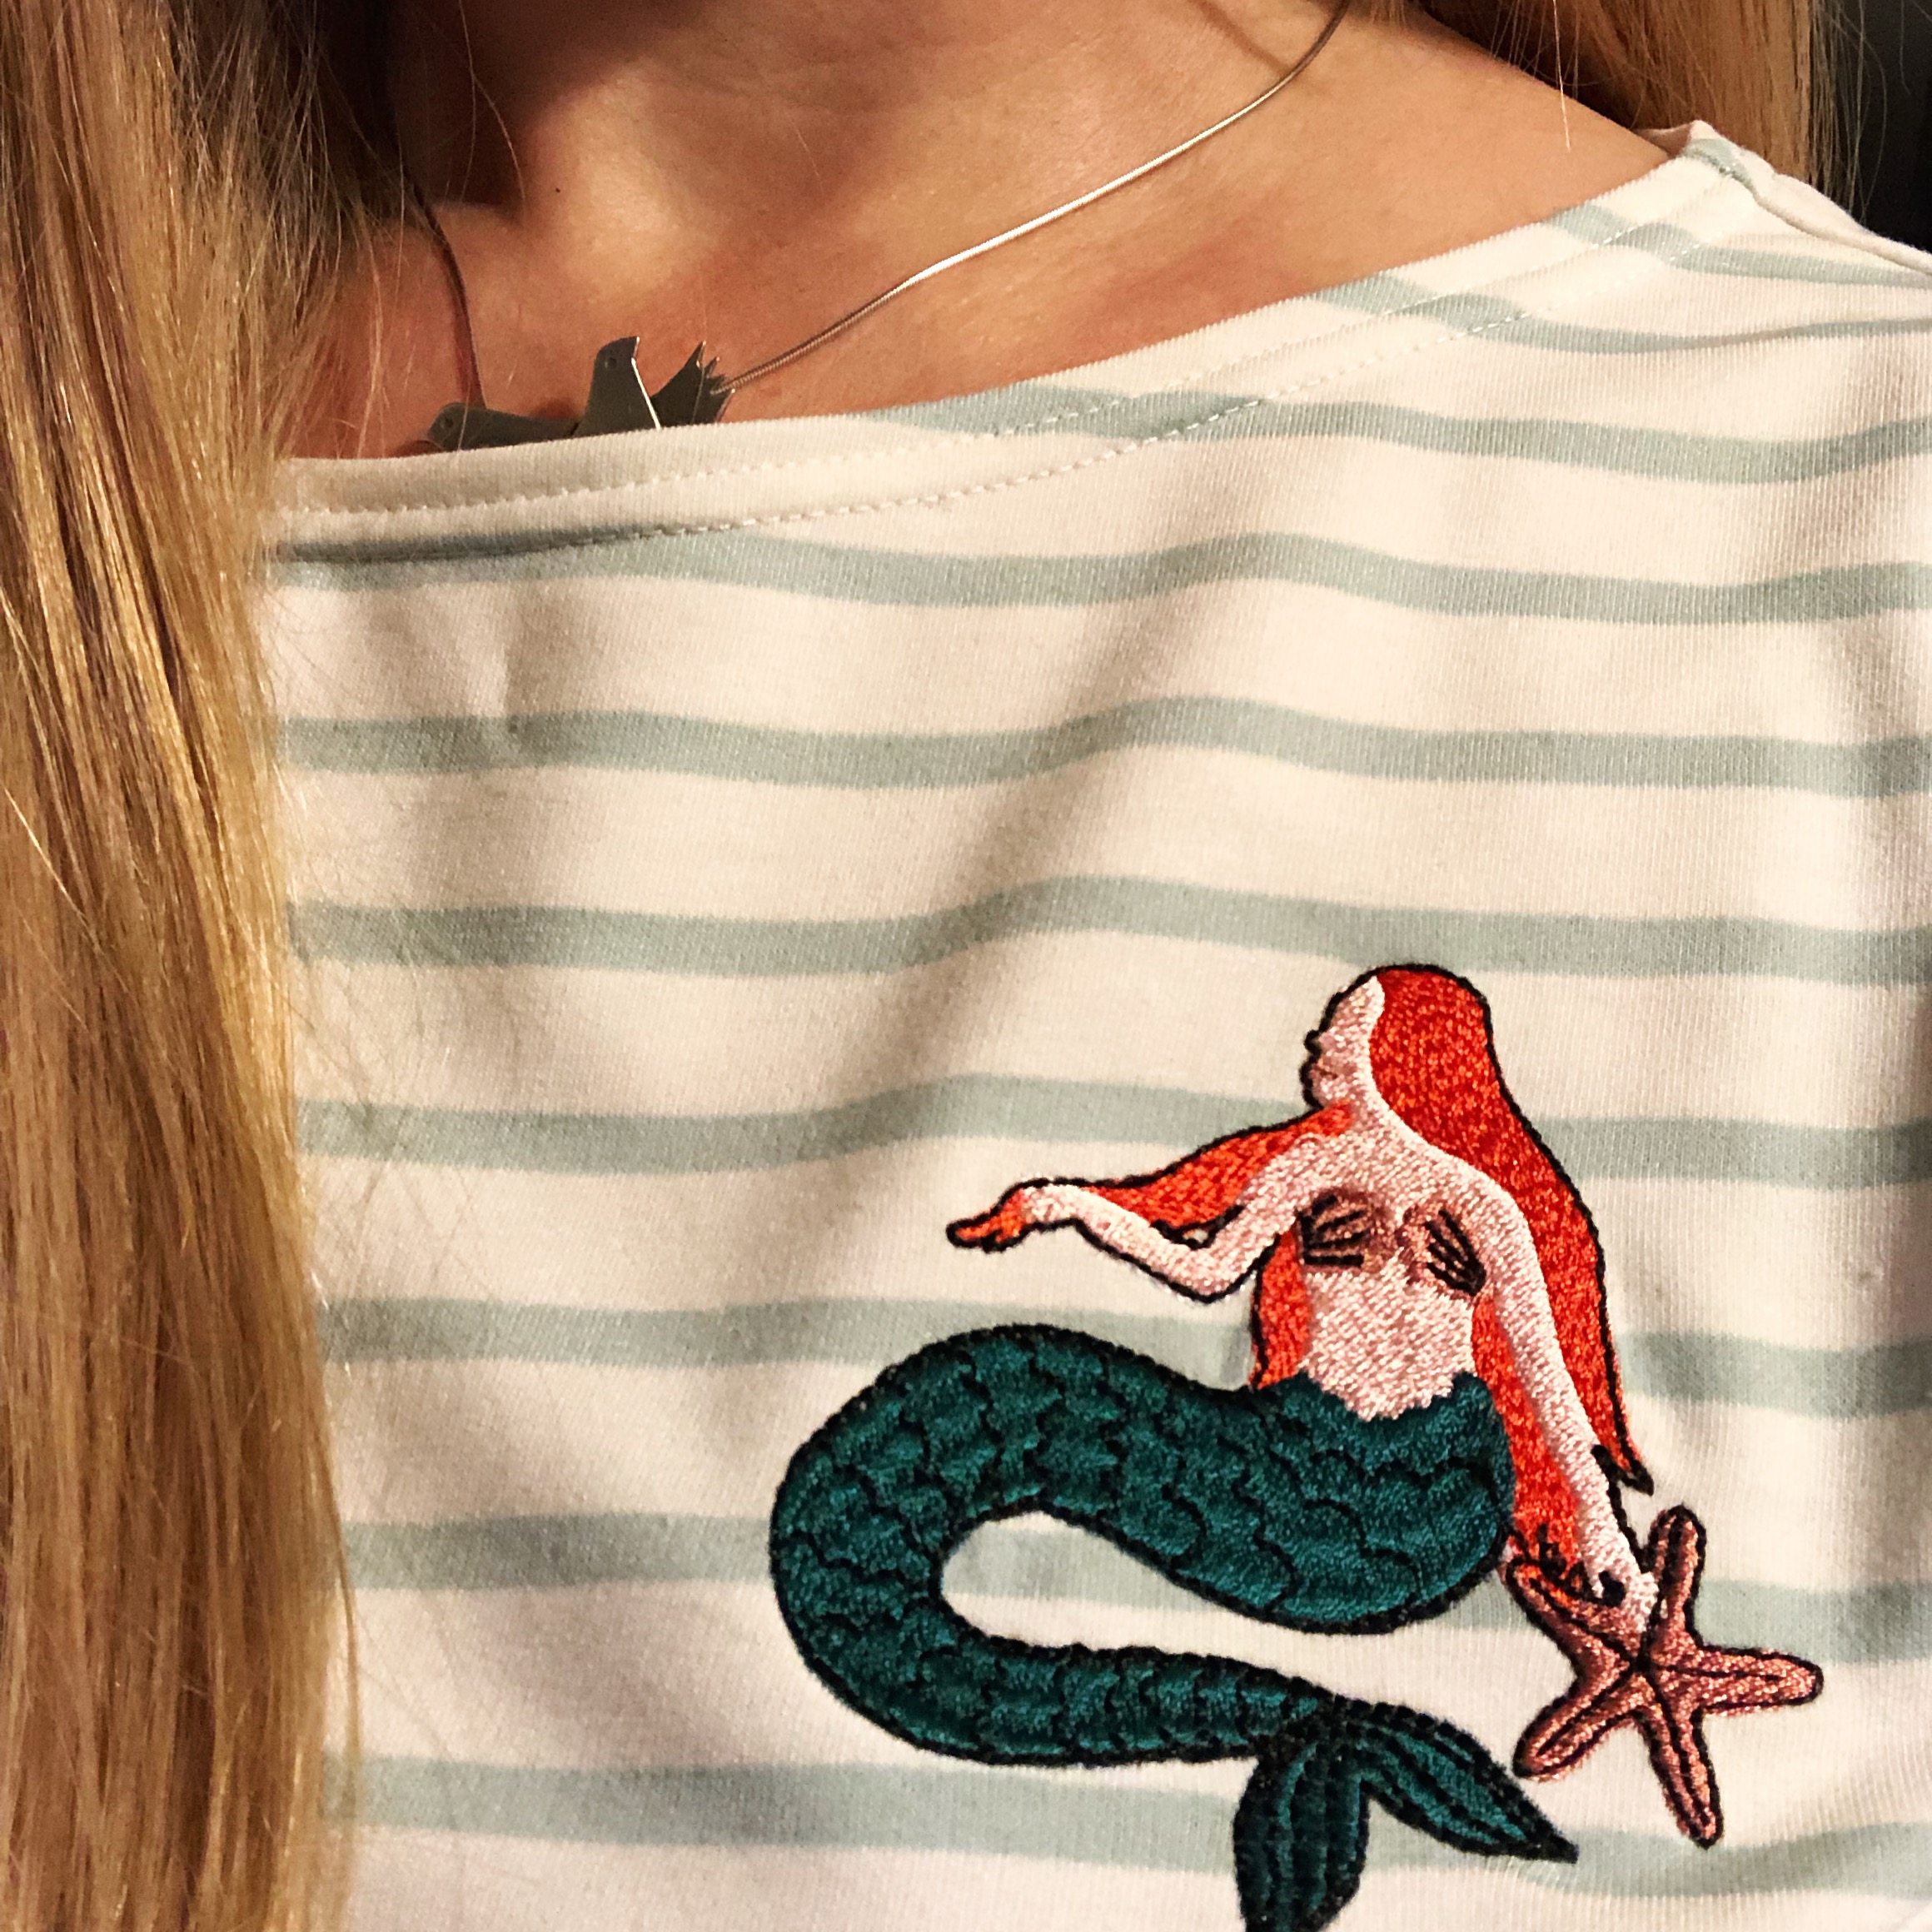 Middle aged beauty blogger mermaid top